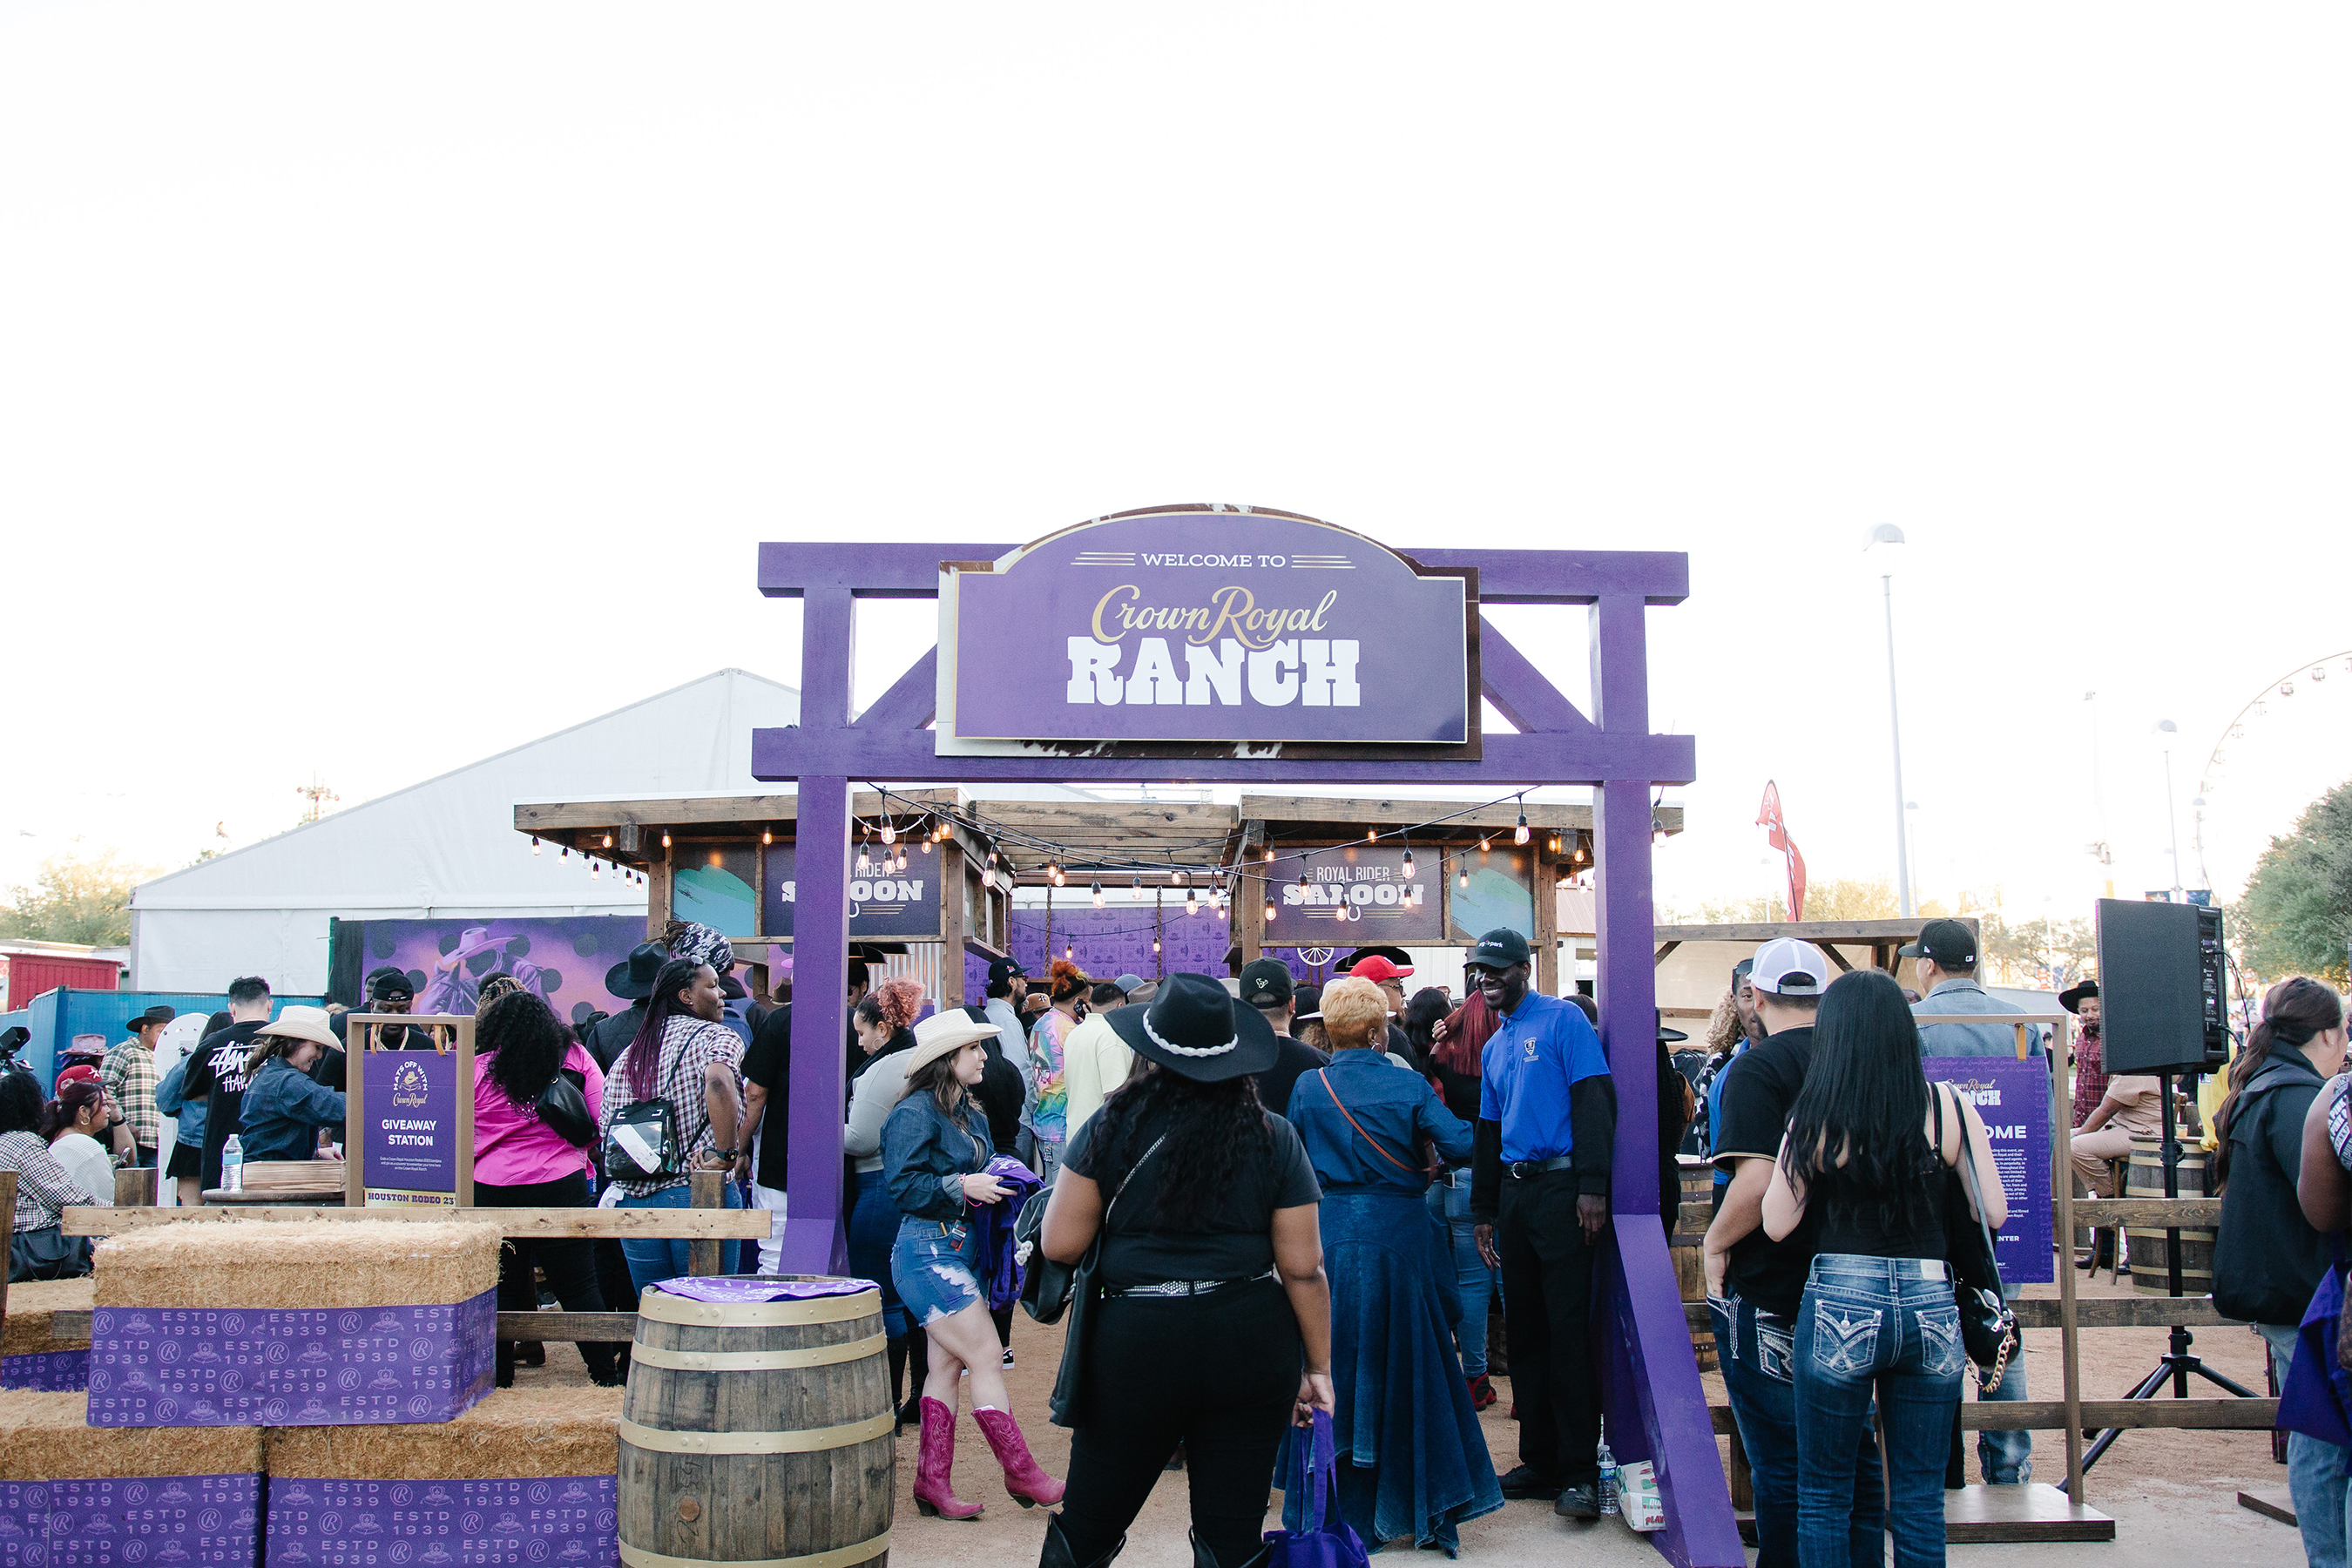 Guests attend the Crown Royal Ranch at the Houston Rodeo at NRG Park on March 10, 2023 in Houston, Texas. (Photo Credit: Yuli Gonzalez)